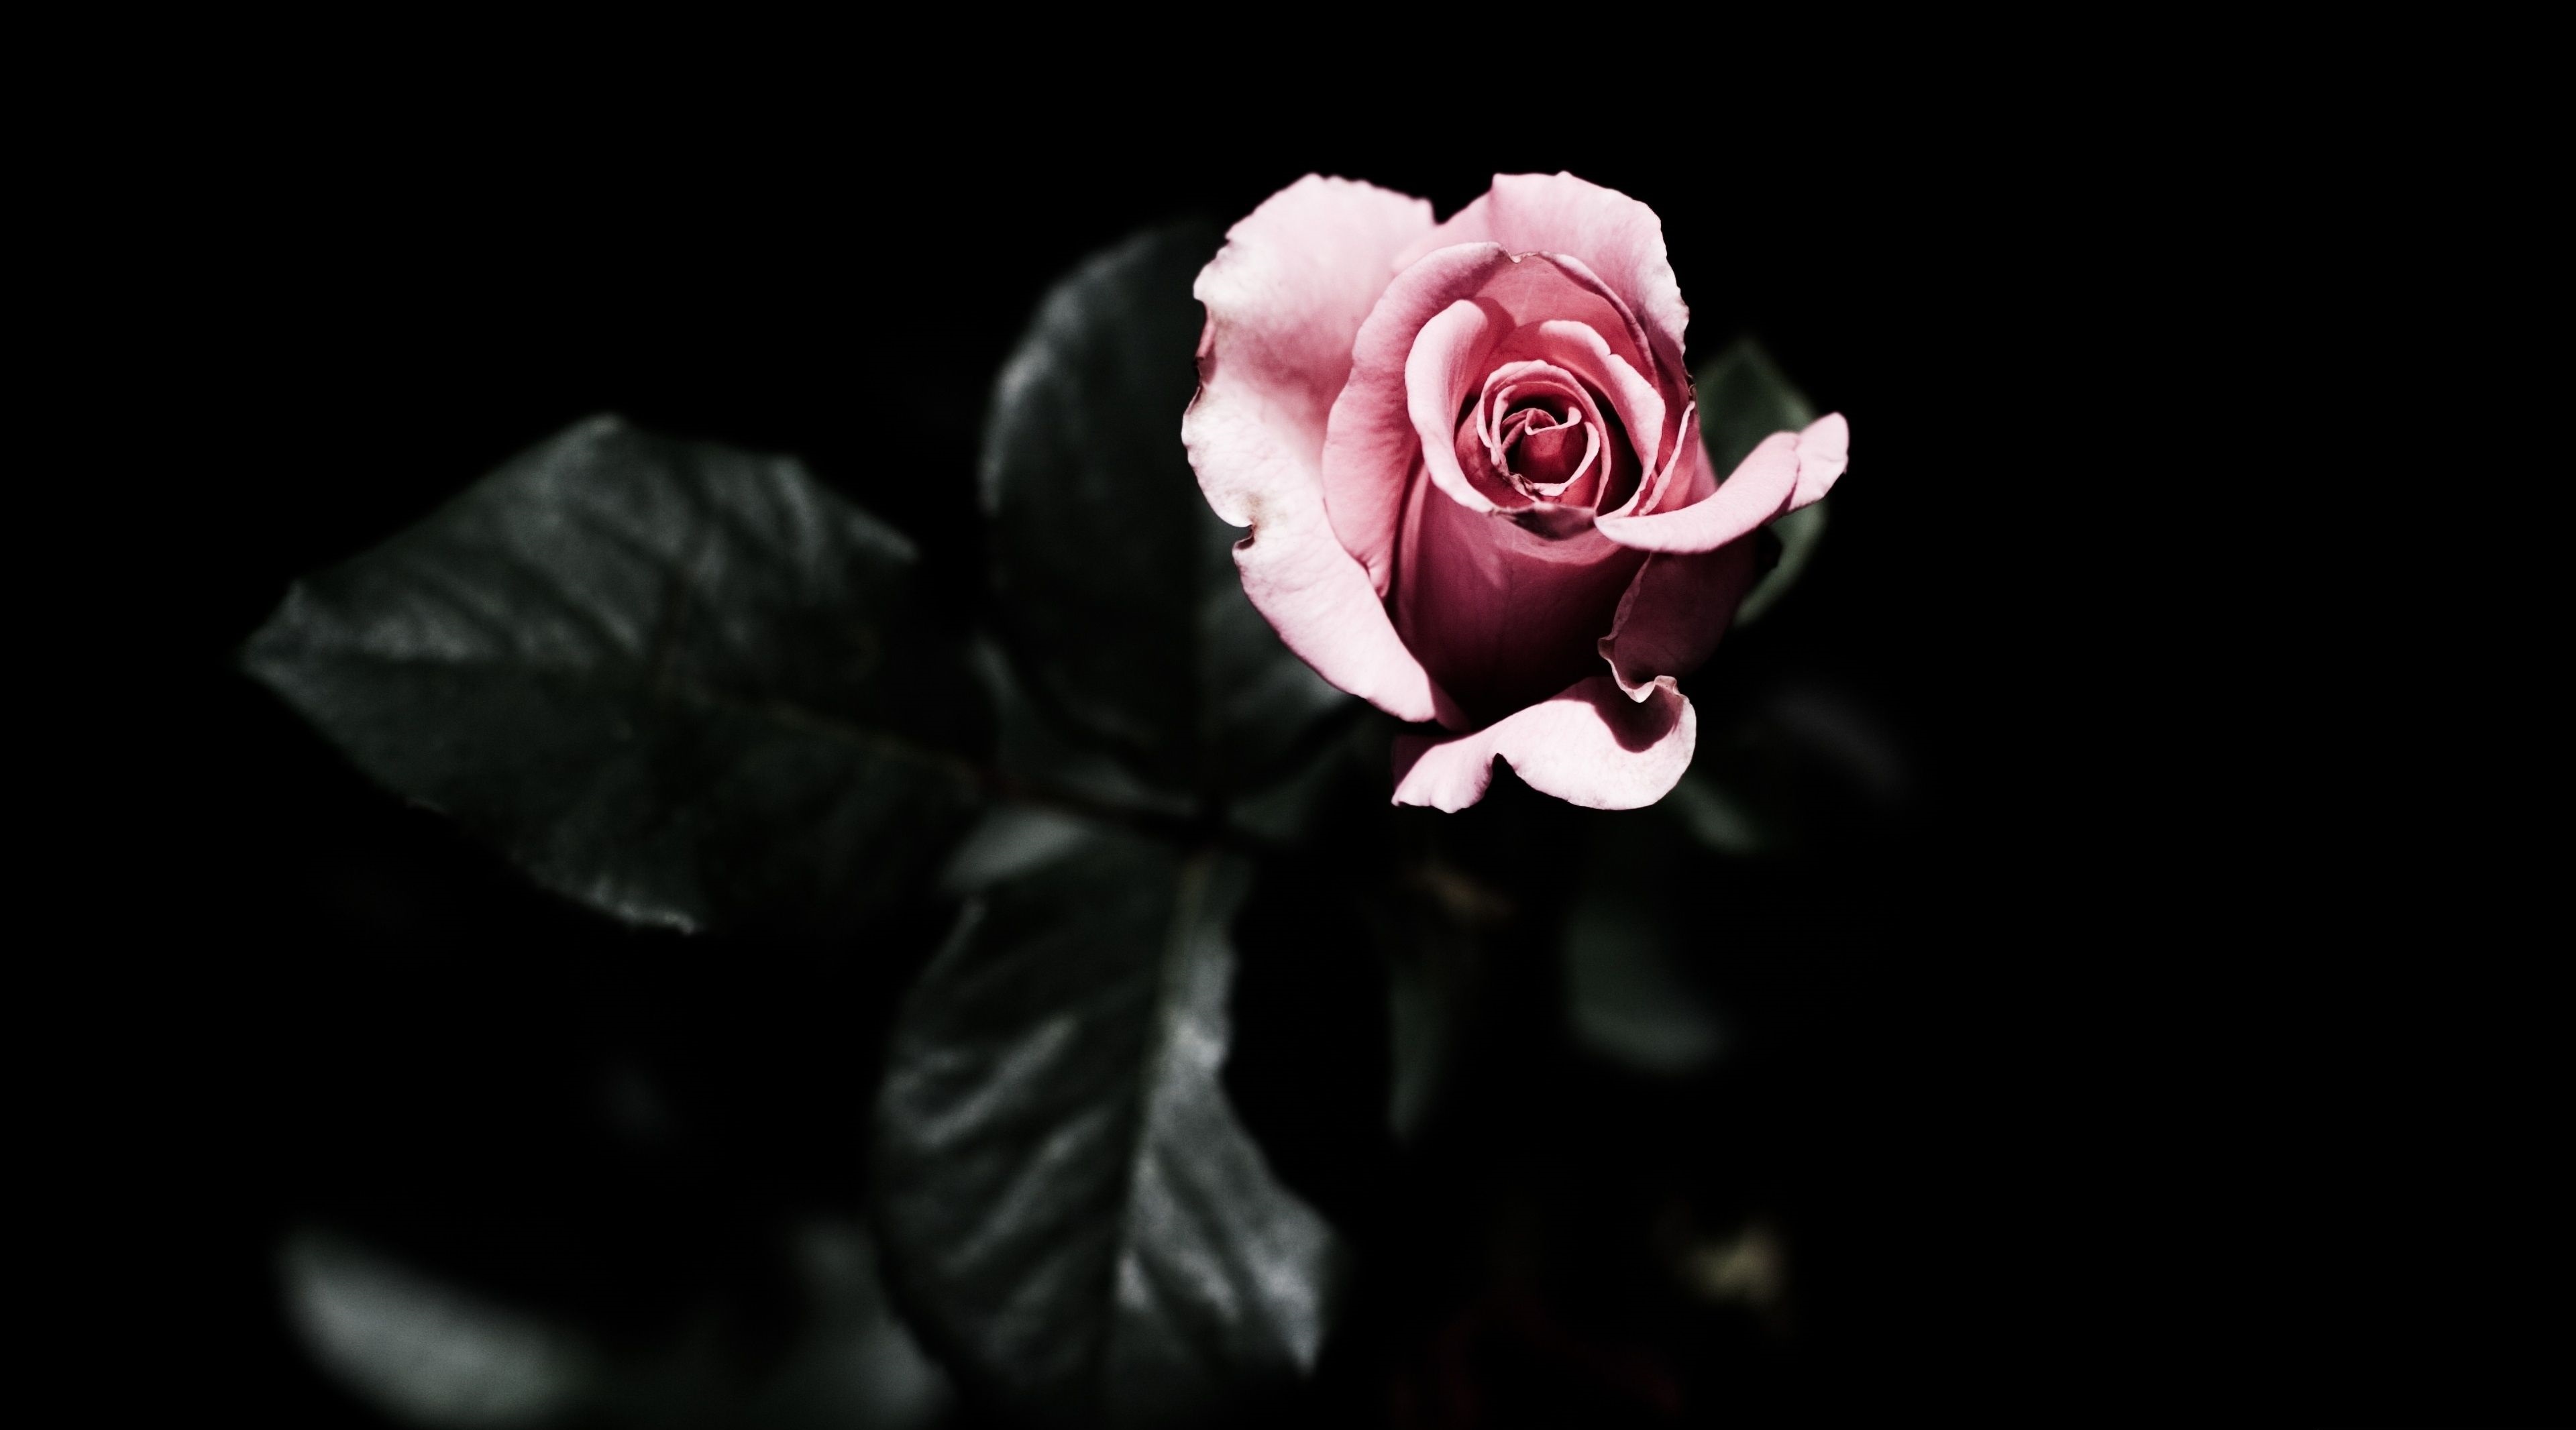 Black Rose Photos Download The BEST Free Black Rose Stock Photos  HD  Images